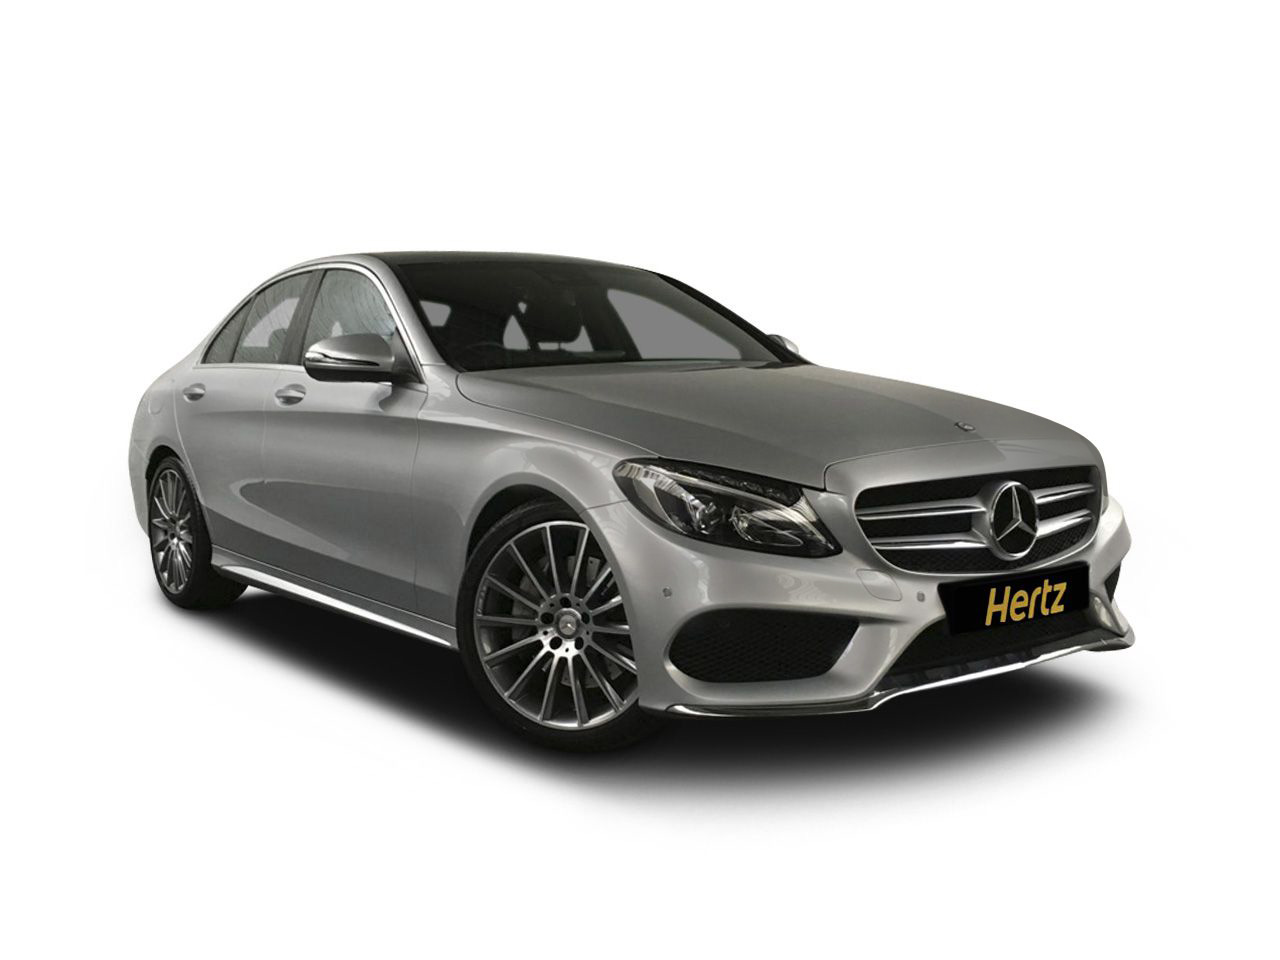 Mercedes C-Class for hire